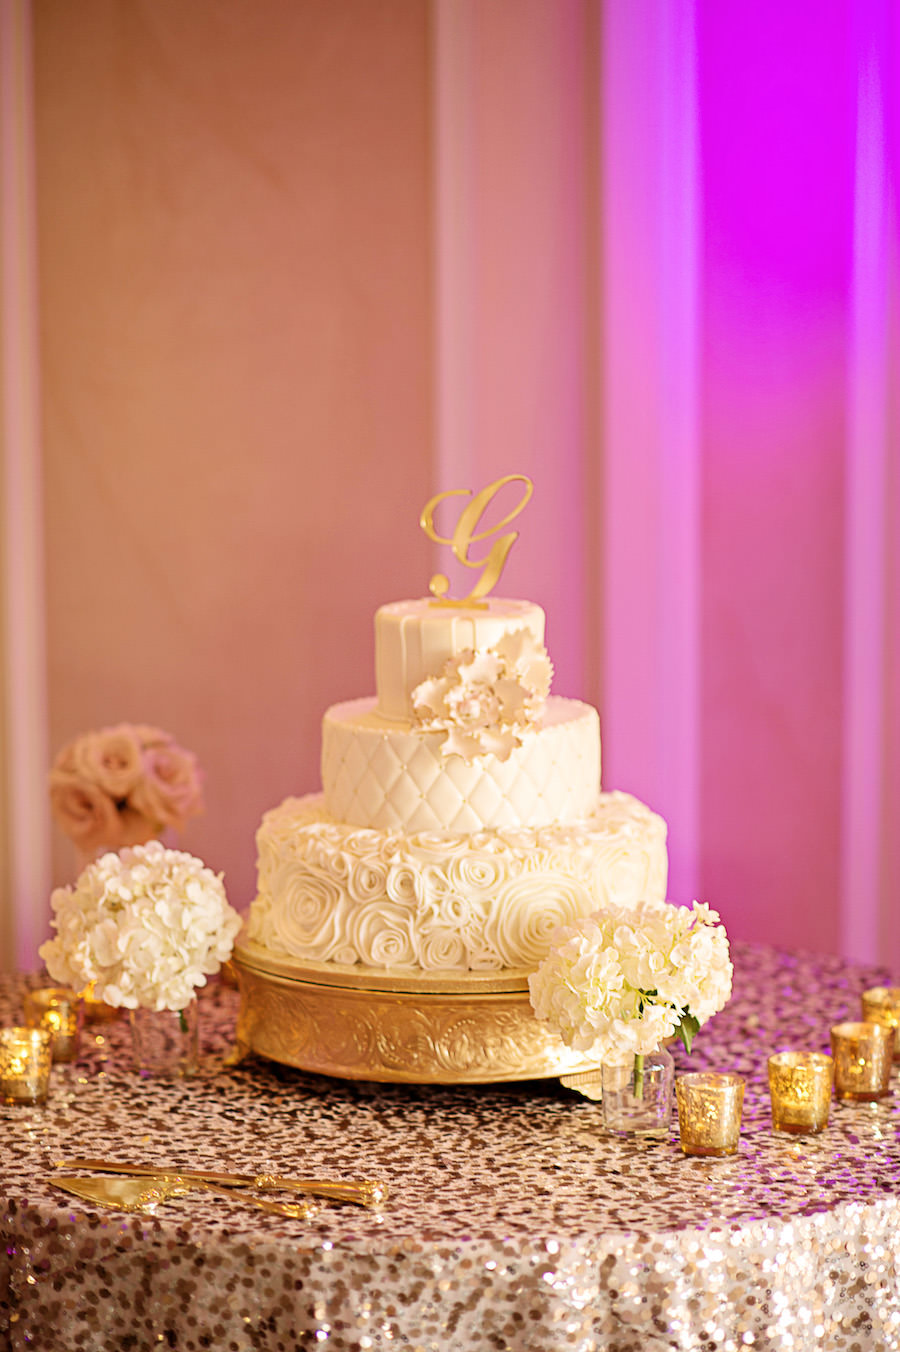 Three Tied Round White Wedding Cake with Rose and Quilt Pattern and Gold Initial Cake Topper on Sequined Specialty Linen